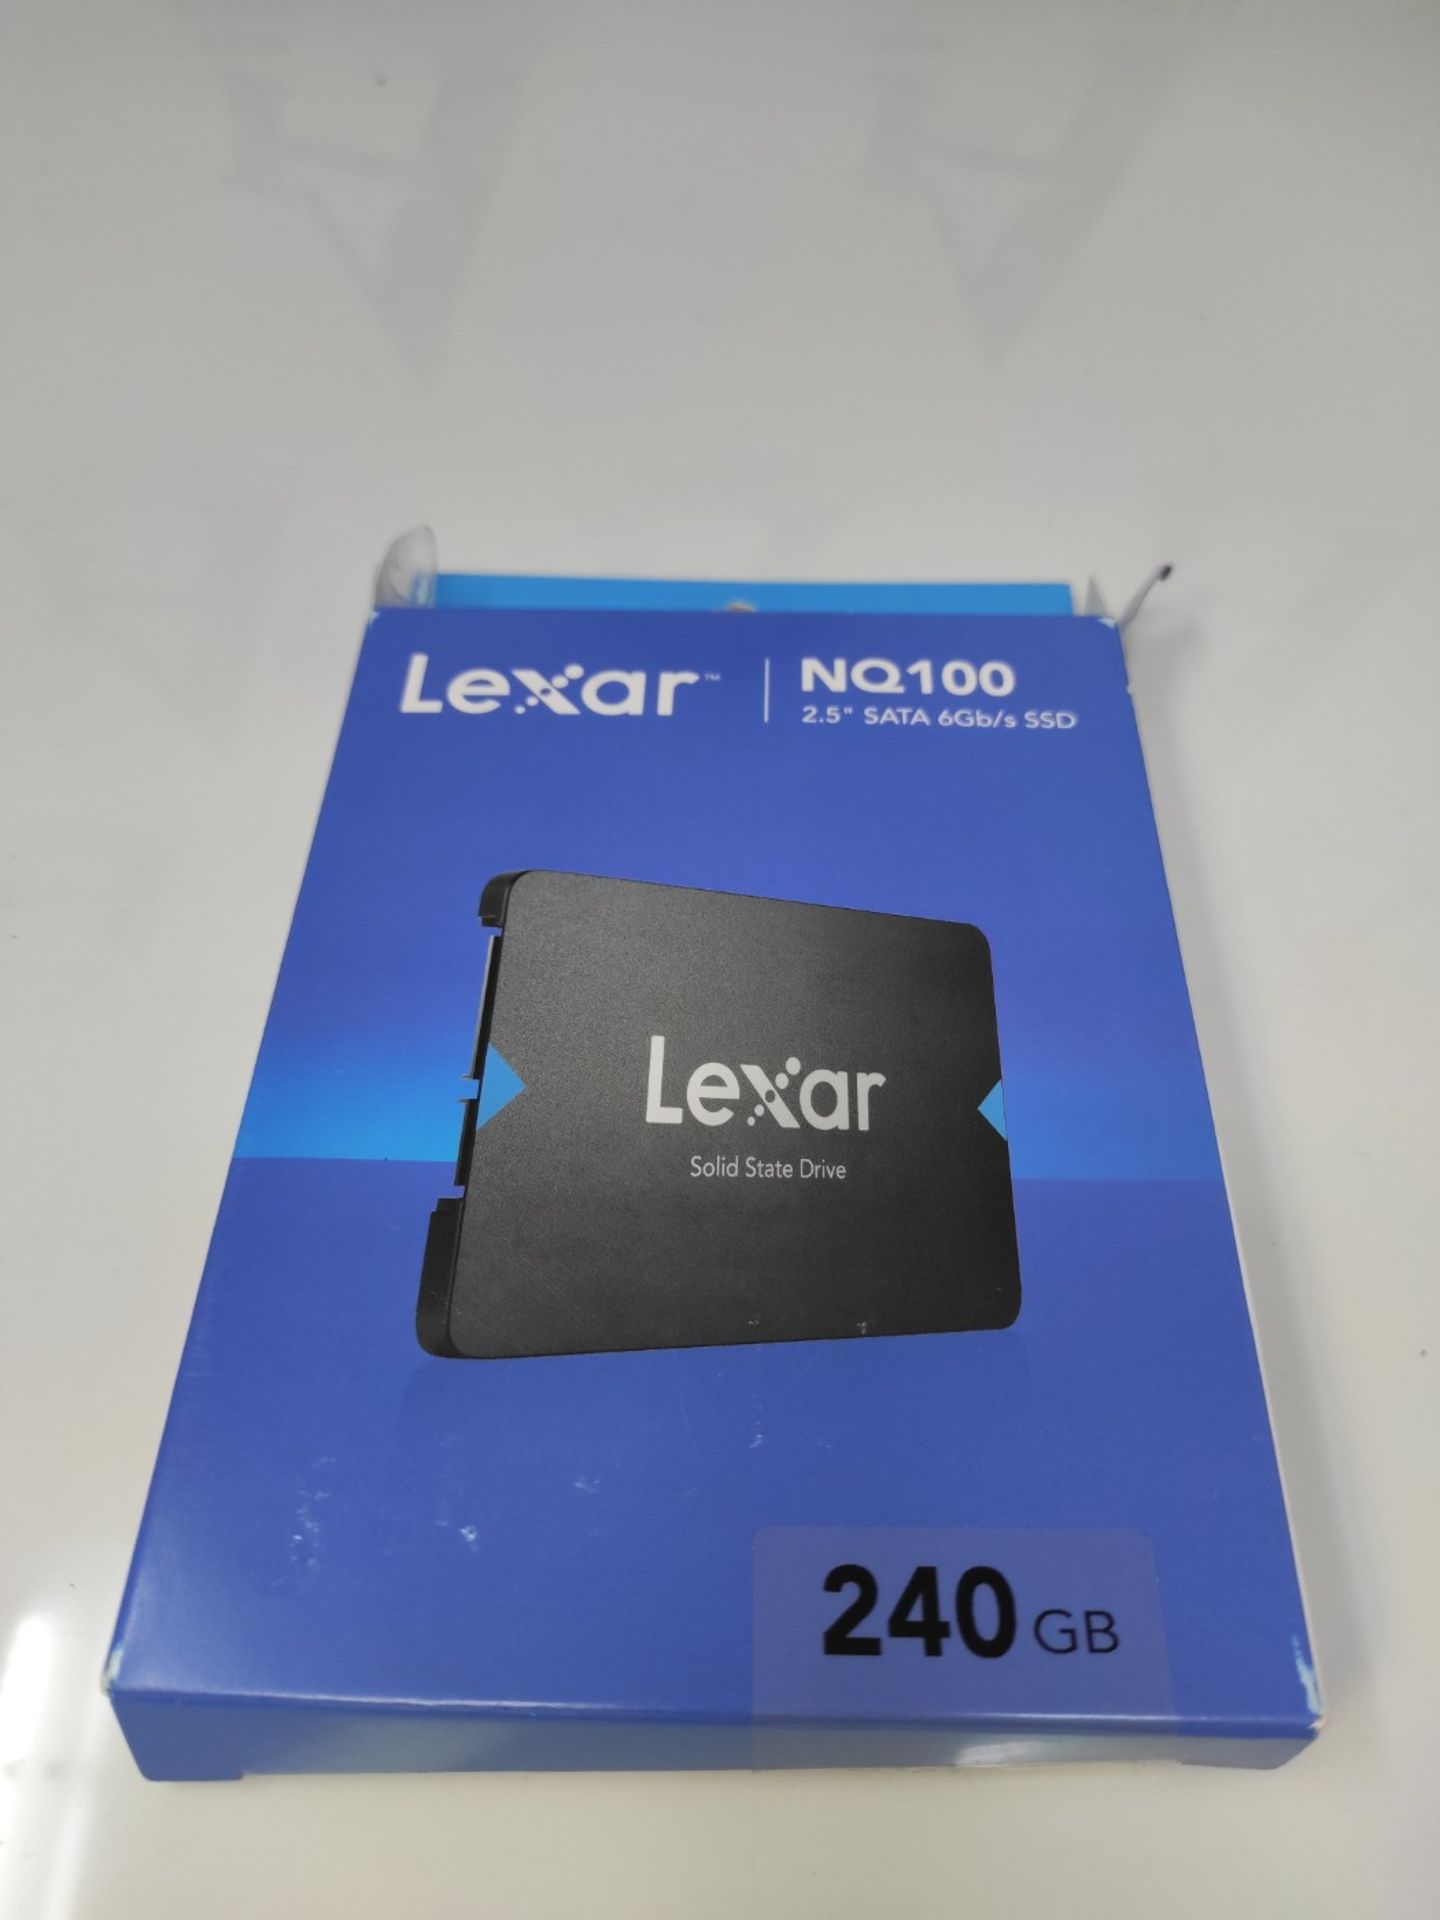 Lexar NQ100 2.5" SATA III (6 Gb/s) 240 GB SSD, Up to 550 MB/s Read Solid State Drive, - Image 5 of 6